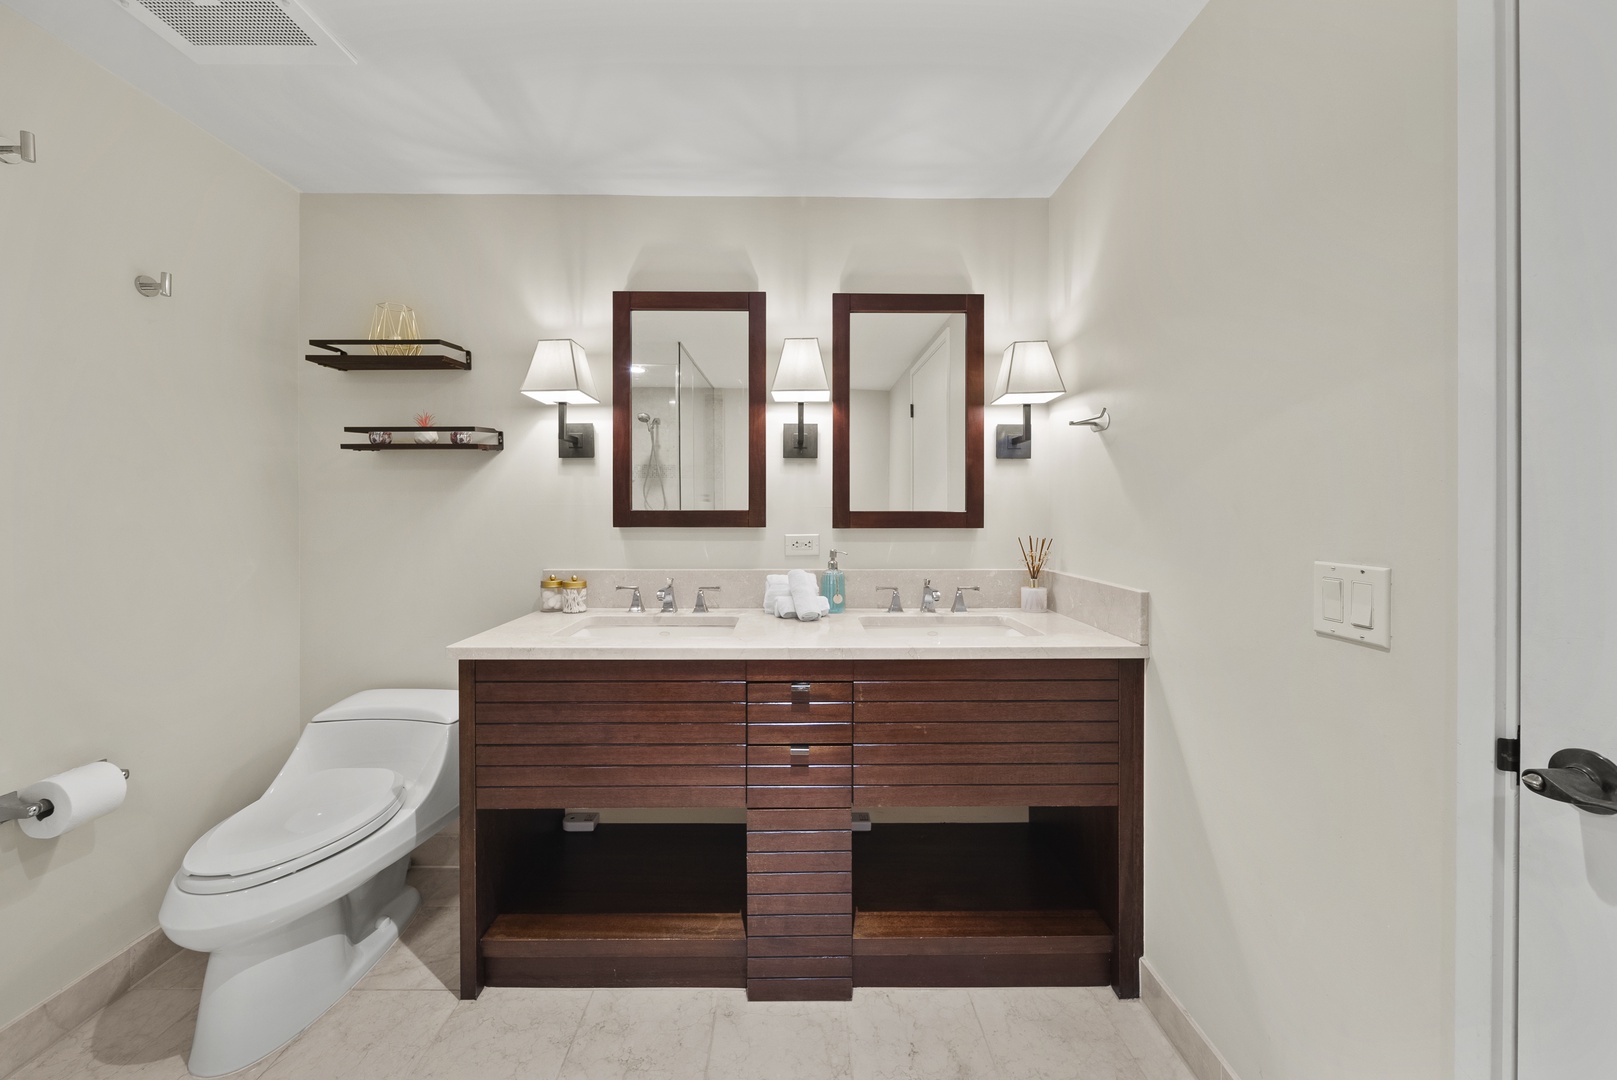 Honolulu Vacation Rentals, Watermark Waikiki Unit 901 - A chic and spacious ensuite bathroom for the primary guest bedroom.